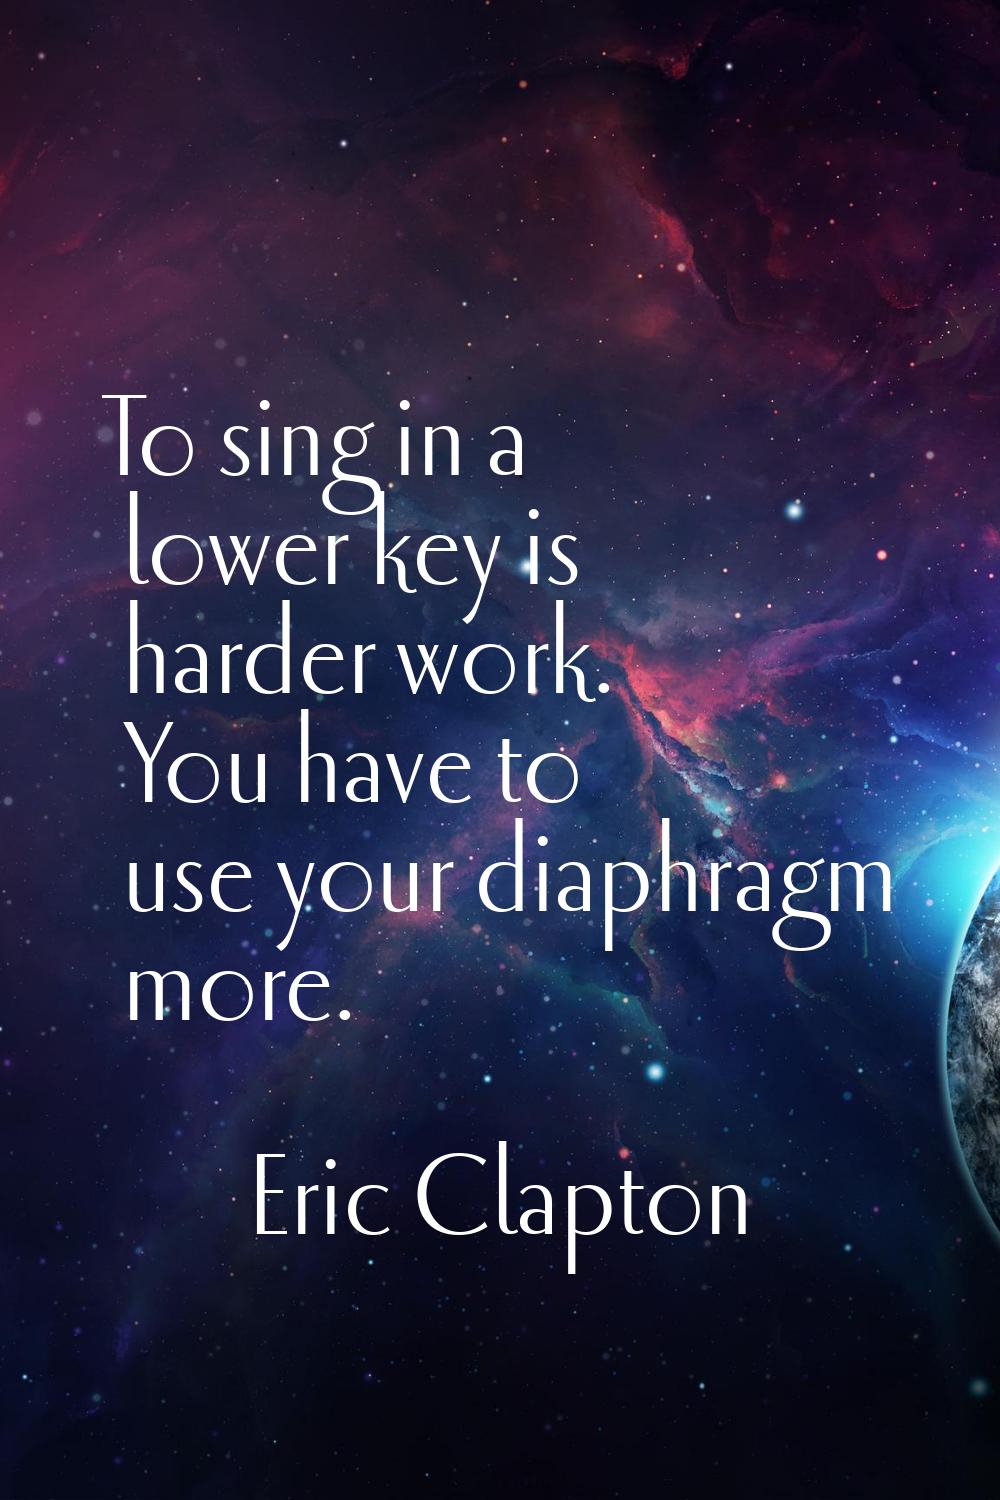 To sing in a lower key is harder work. You have to use your diaphragm more.